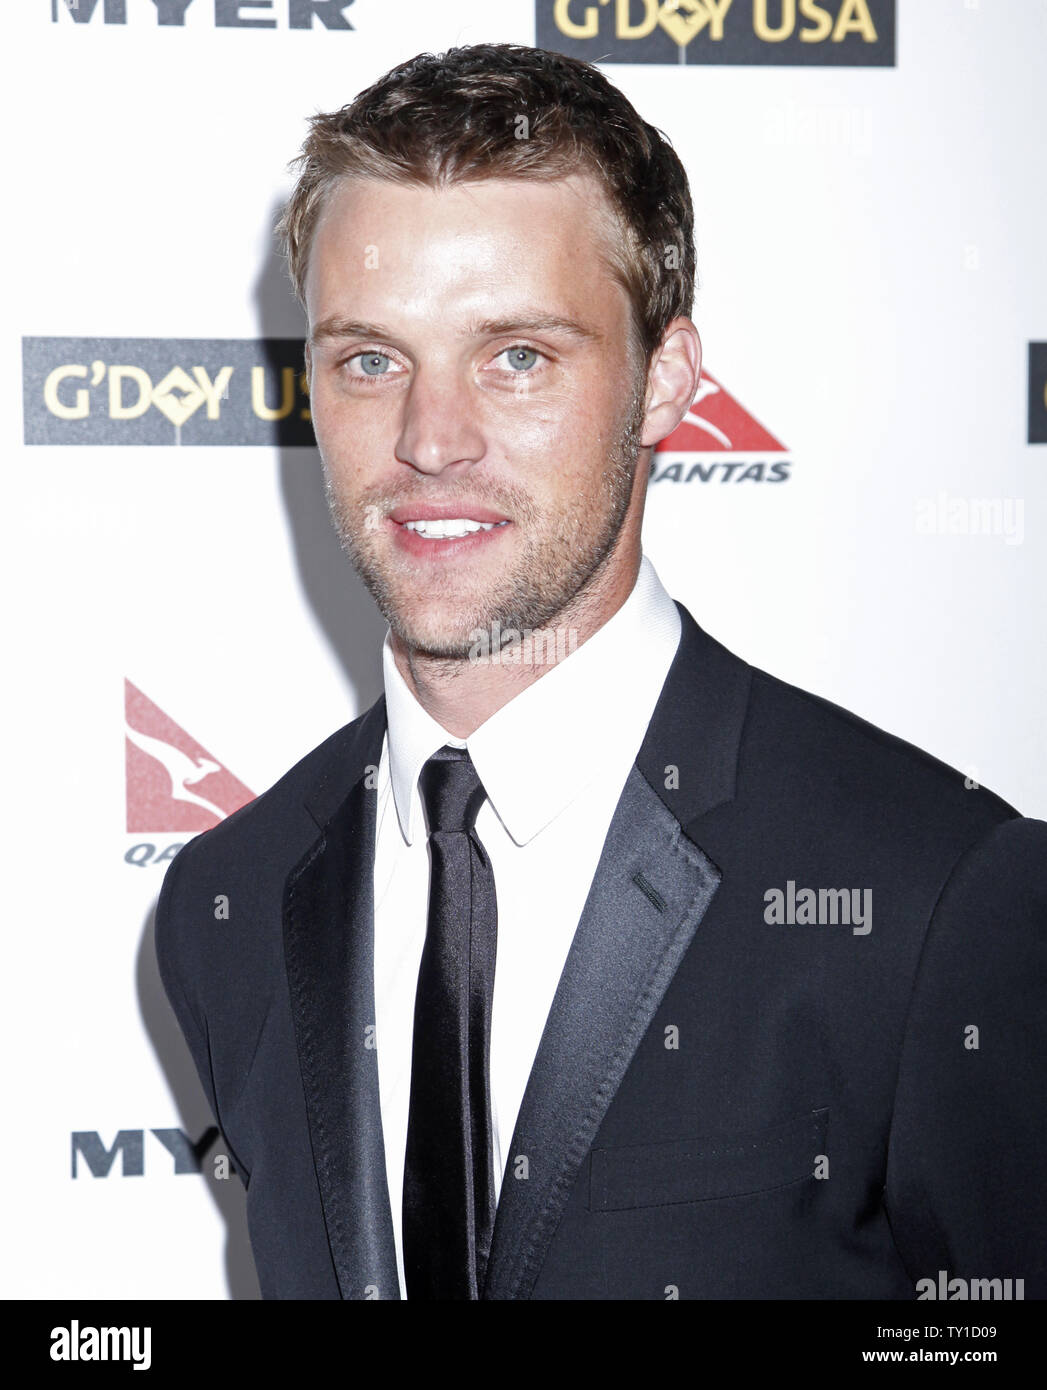 Jesse Spencer arrives on the red carpet at the G'Day USA 2010 Los Angeles Black Tie Gala in Hollywood on January 16, 2010.  The event honors high profile individuals for significant contributions to their industries and for excellence in promoting Australia in the United States.   (UPI/David Silpa) Stock Photo